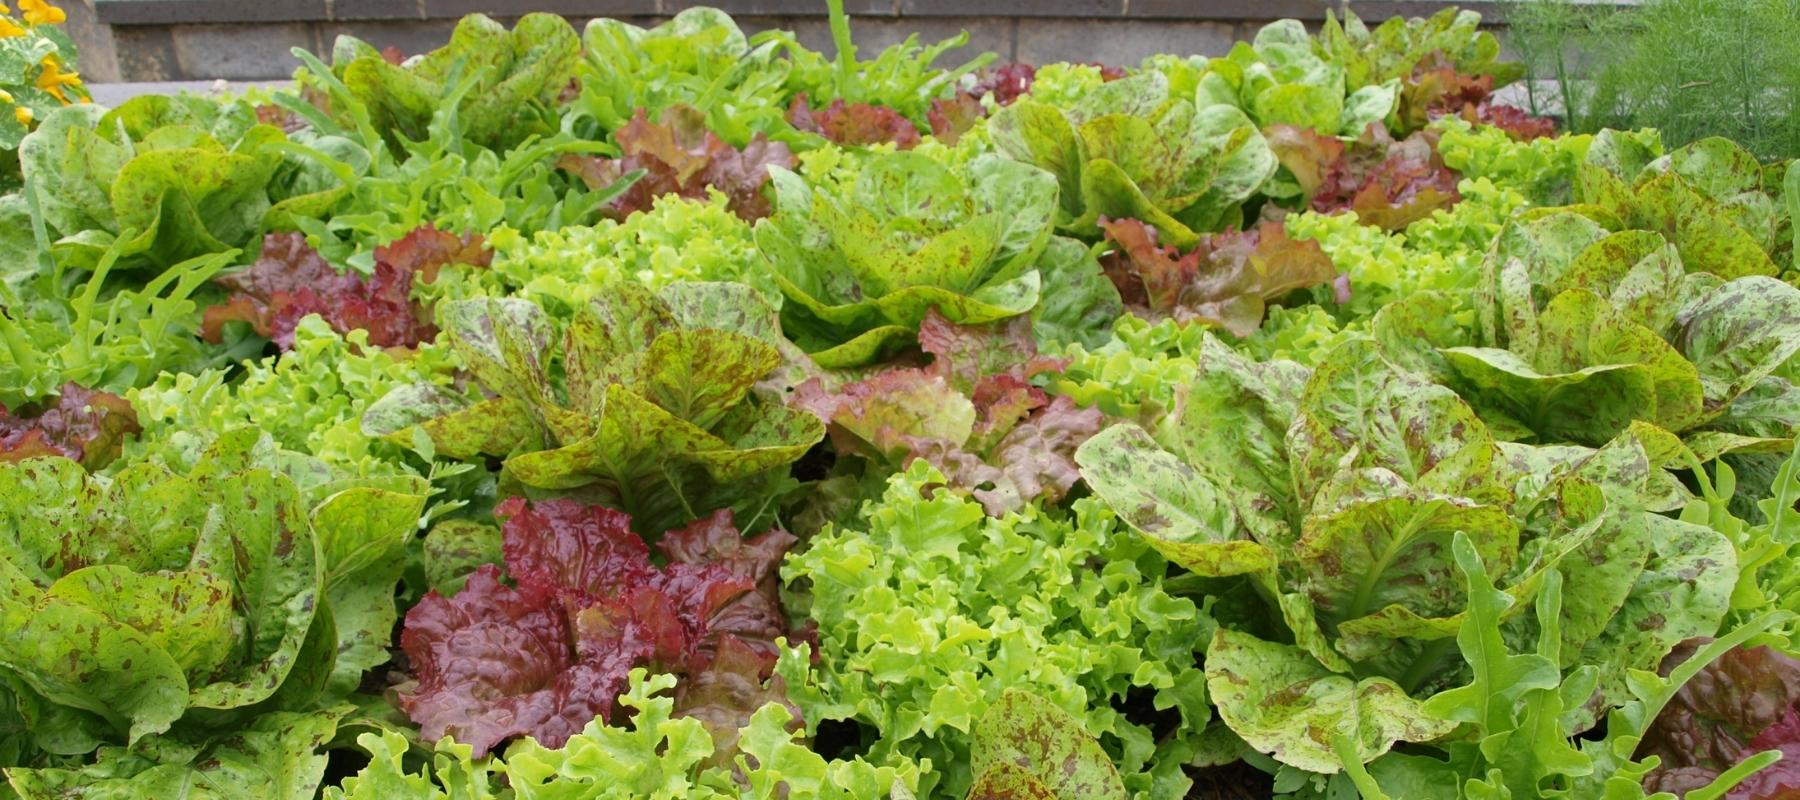 Mixed lettuce growing in a garden bed